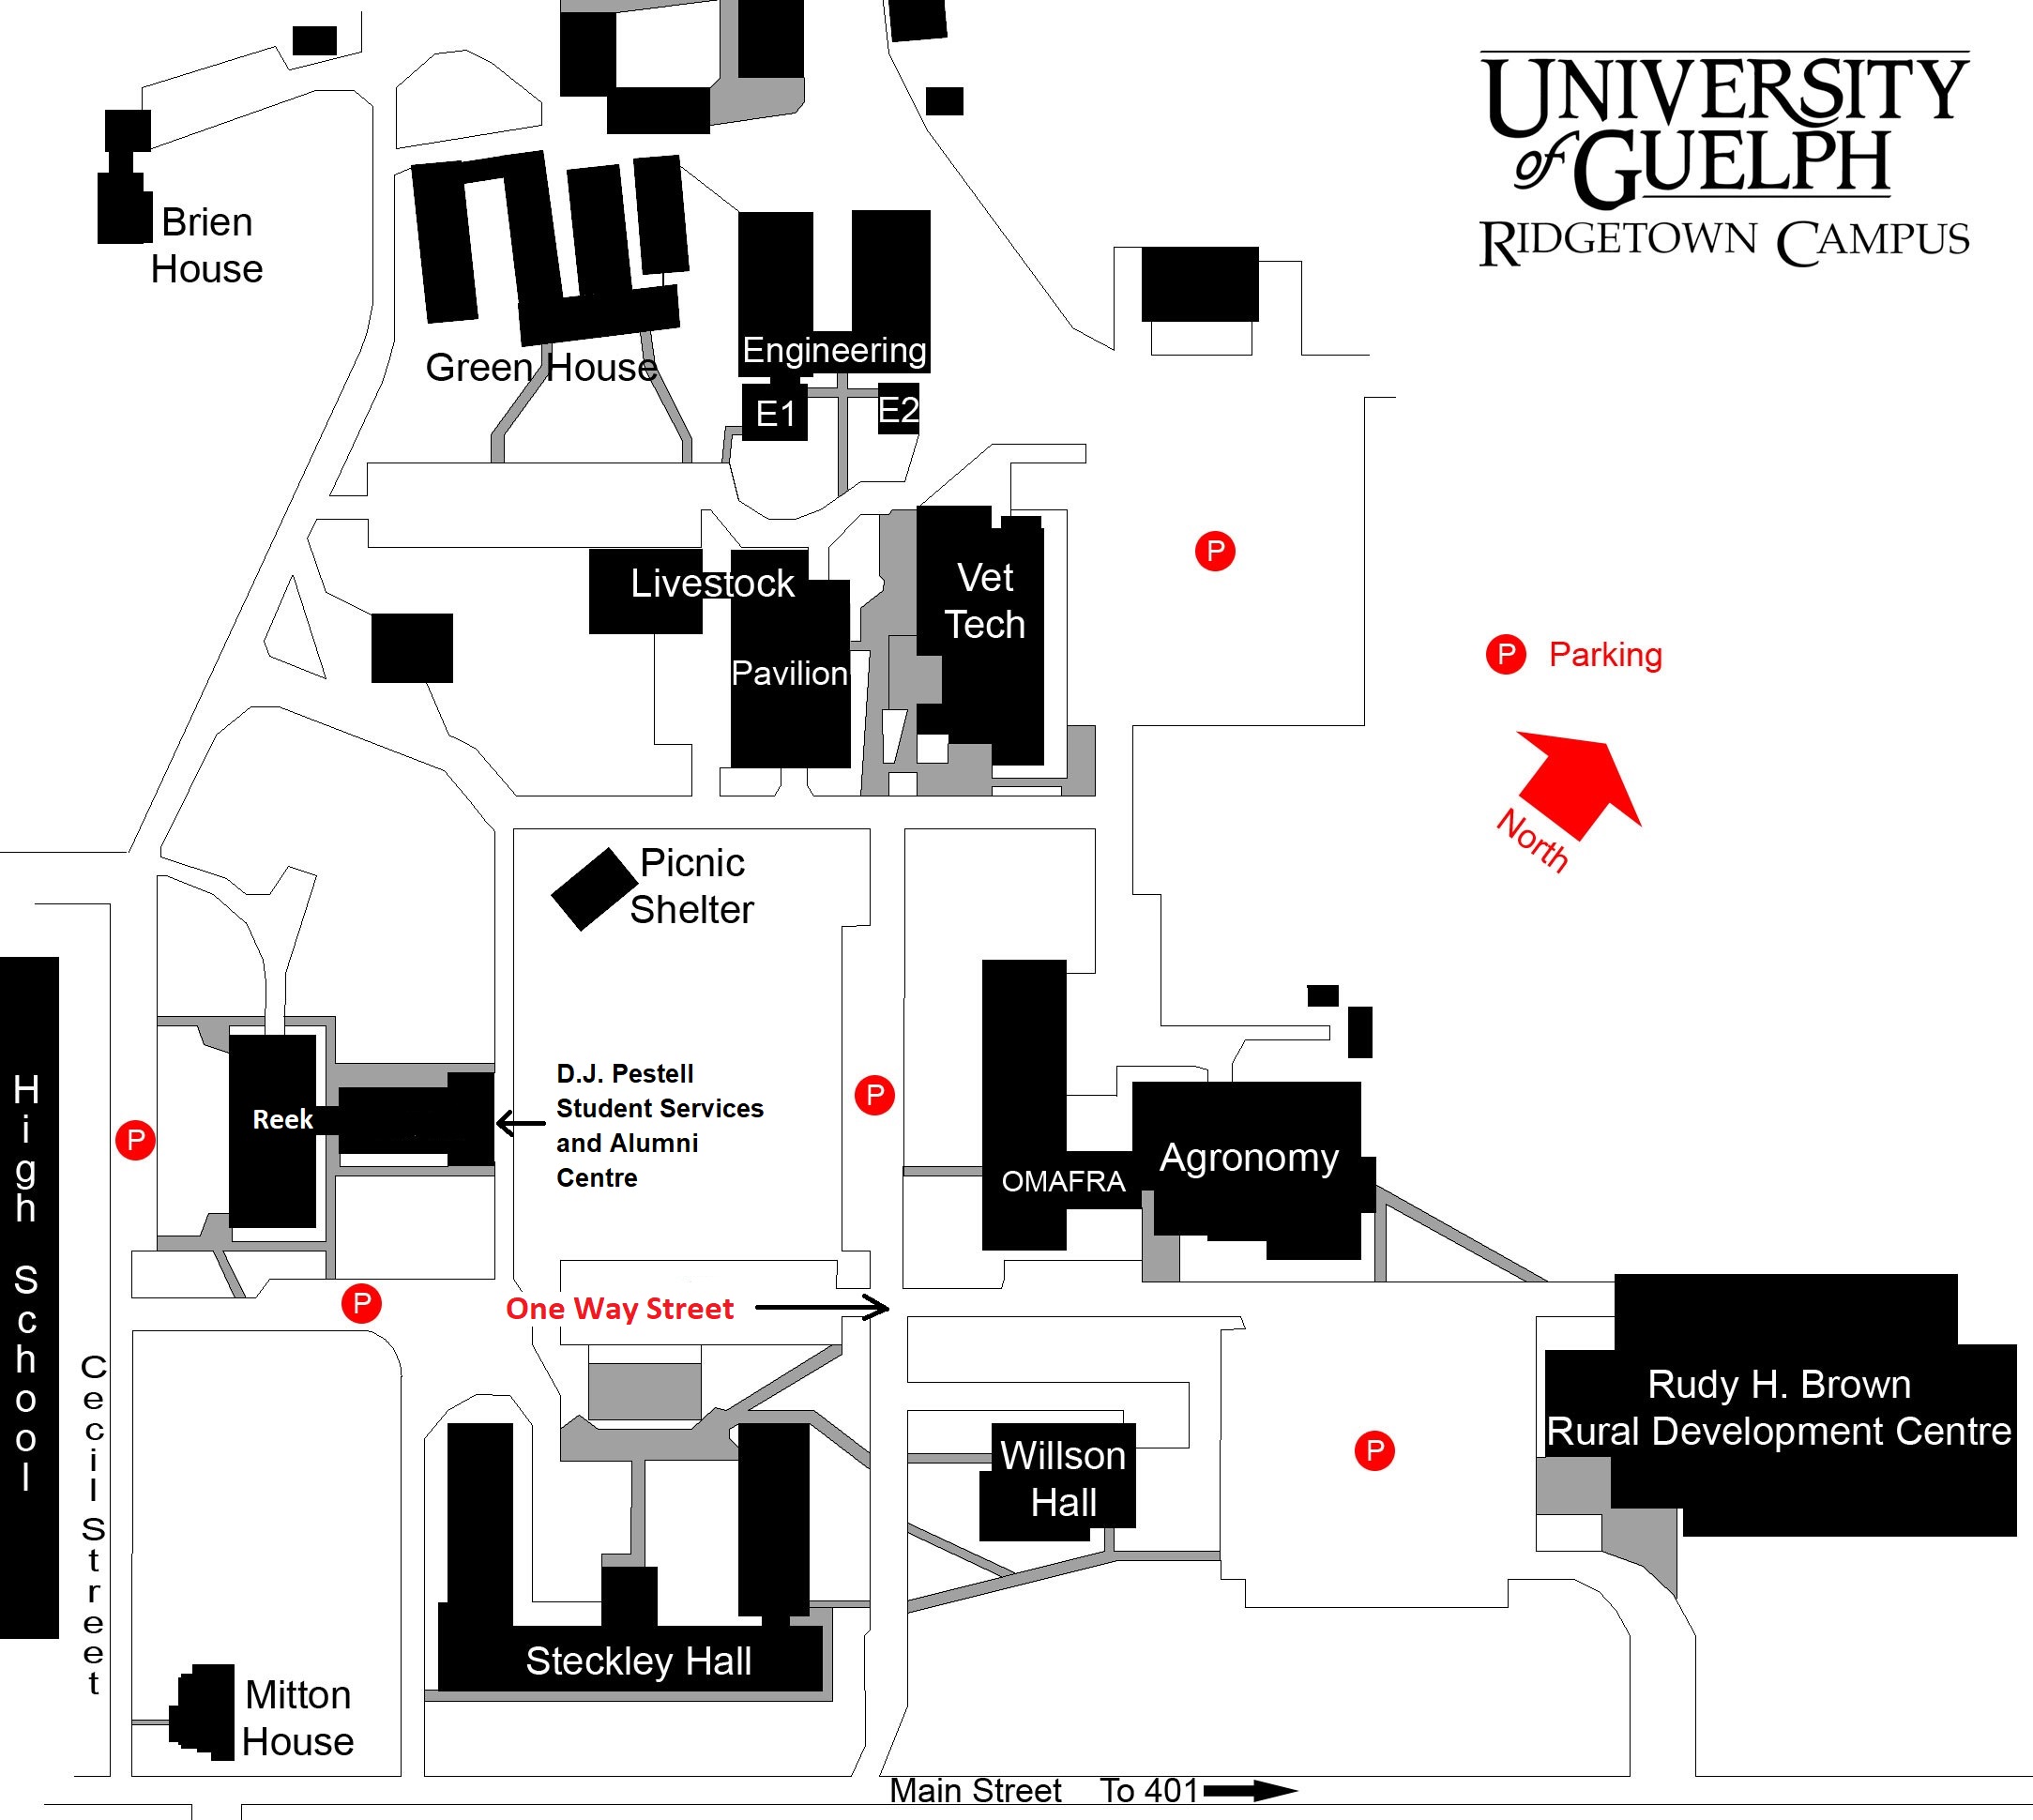 Map of the Ridgetown Campus